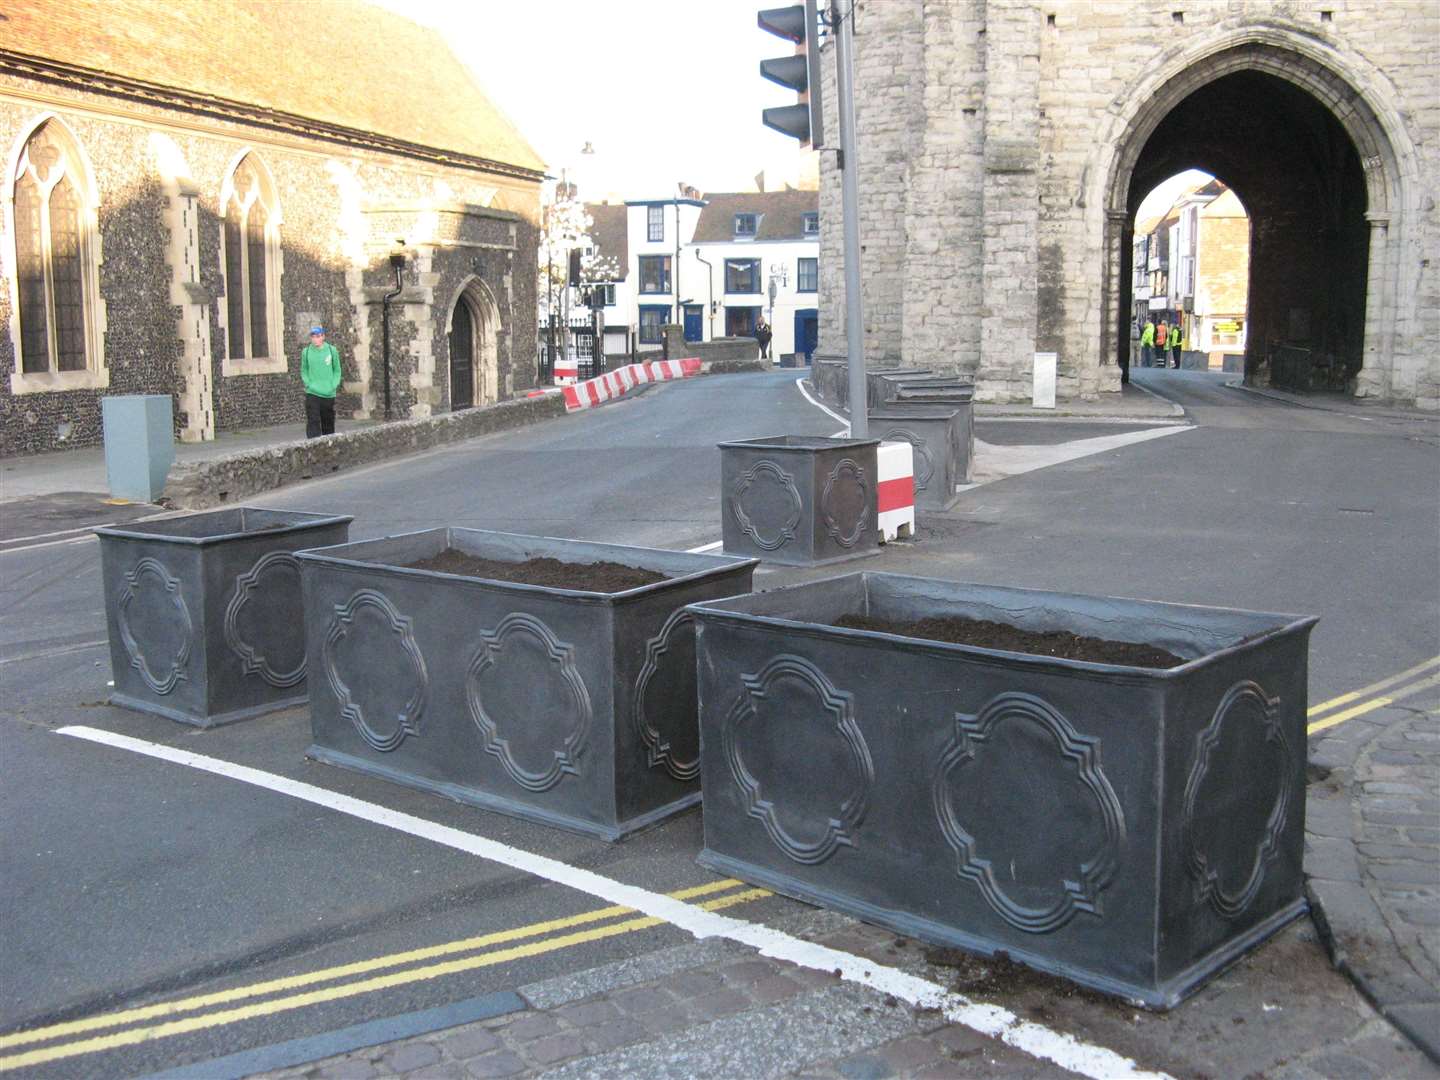 Barriers blocking traffic from passing through the towers